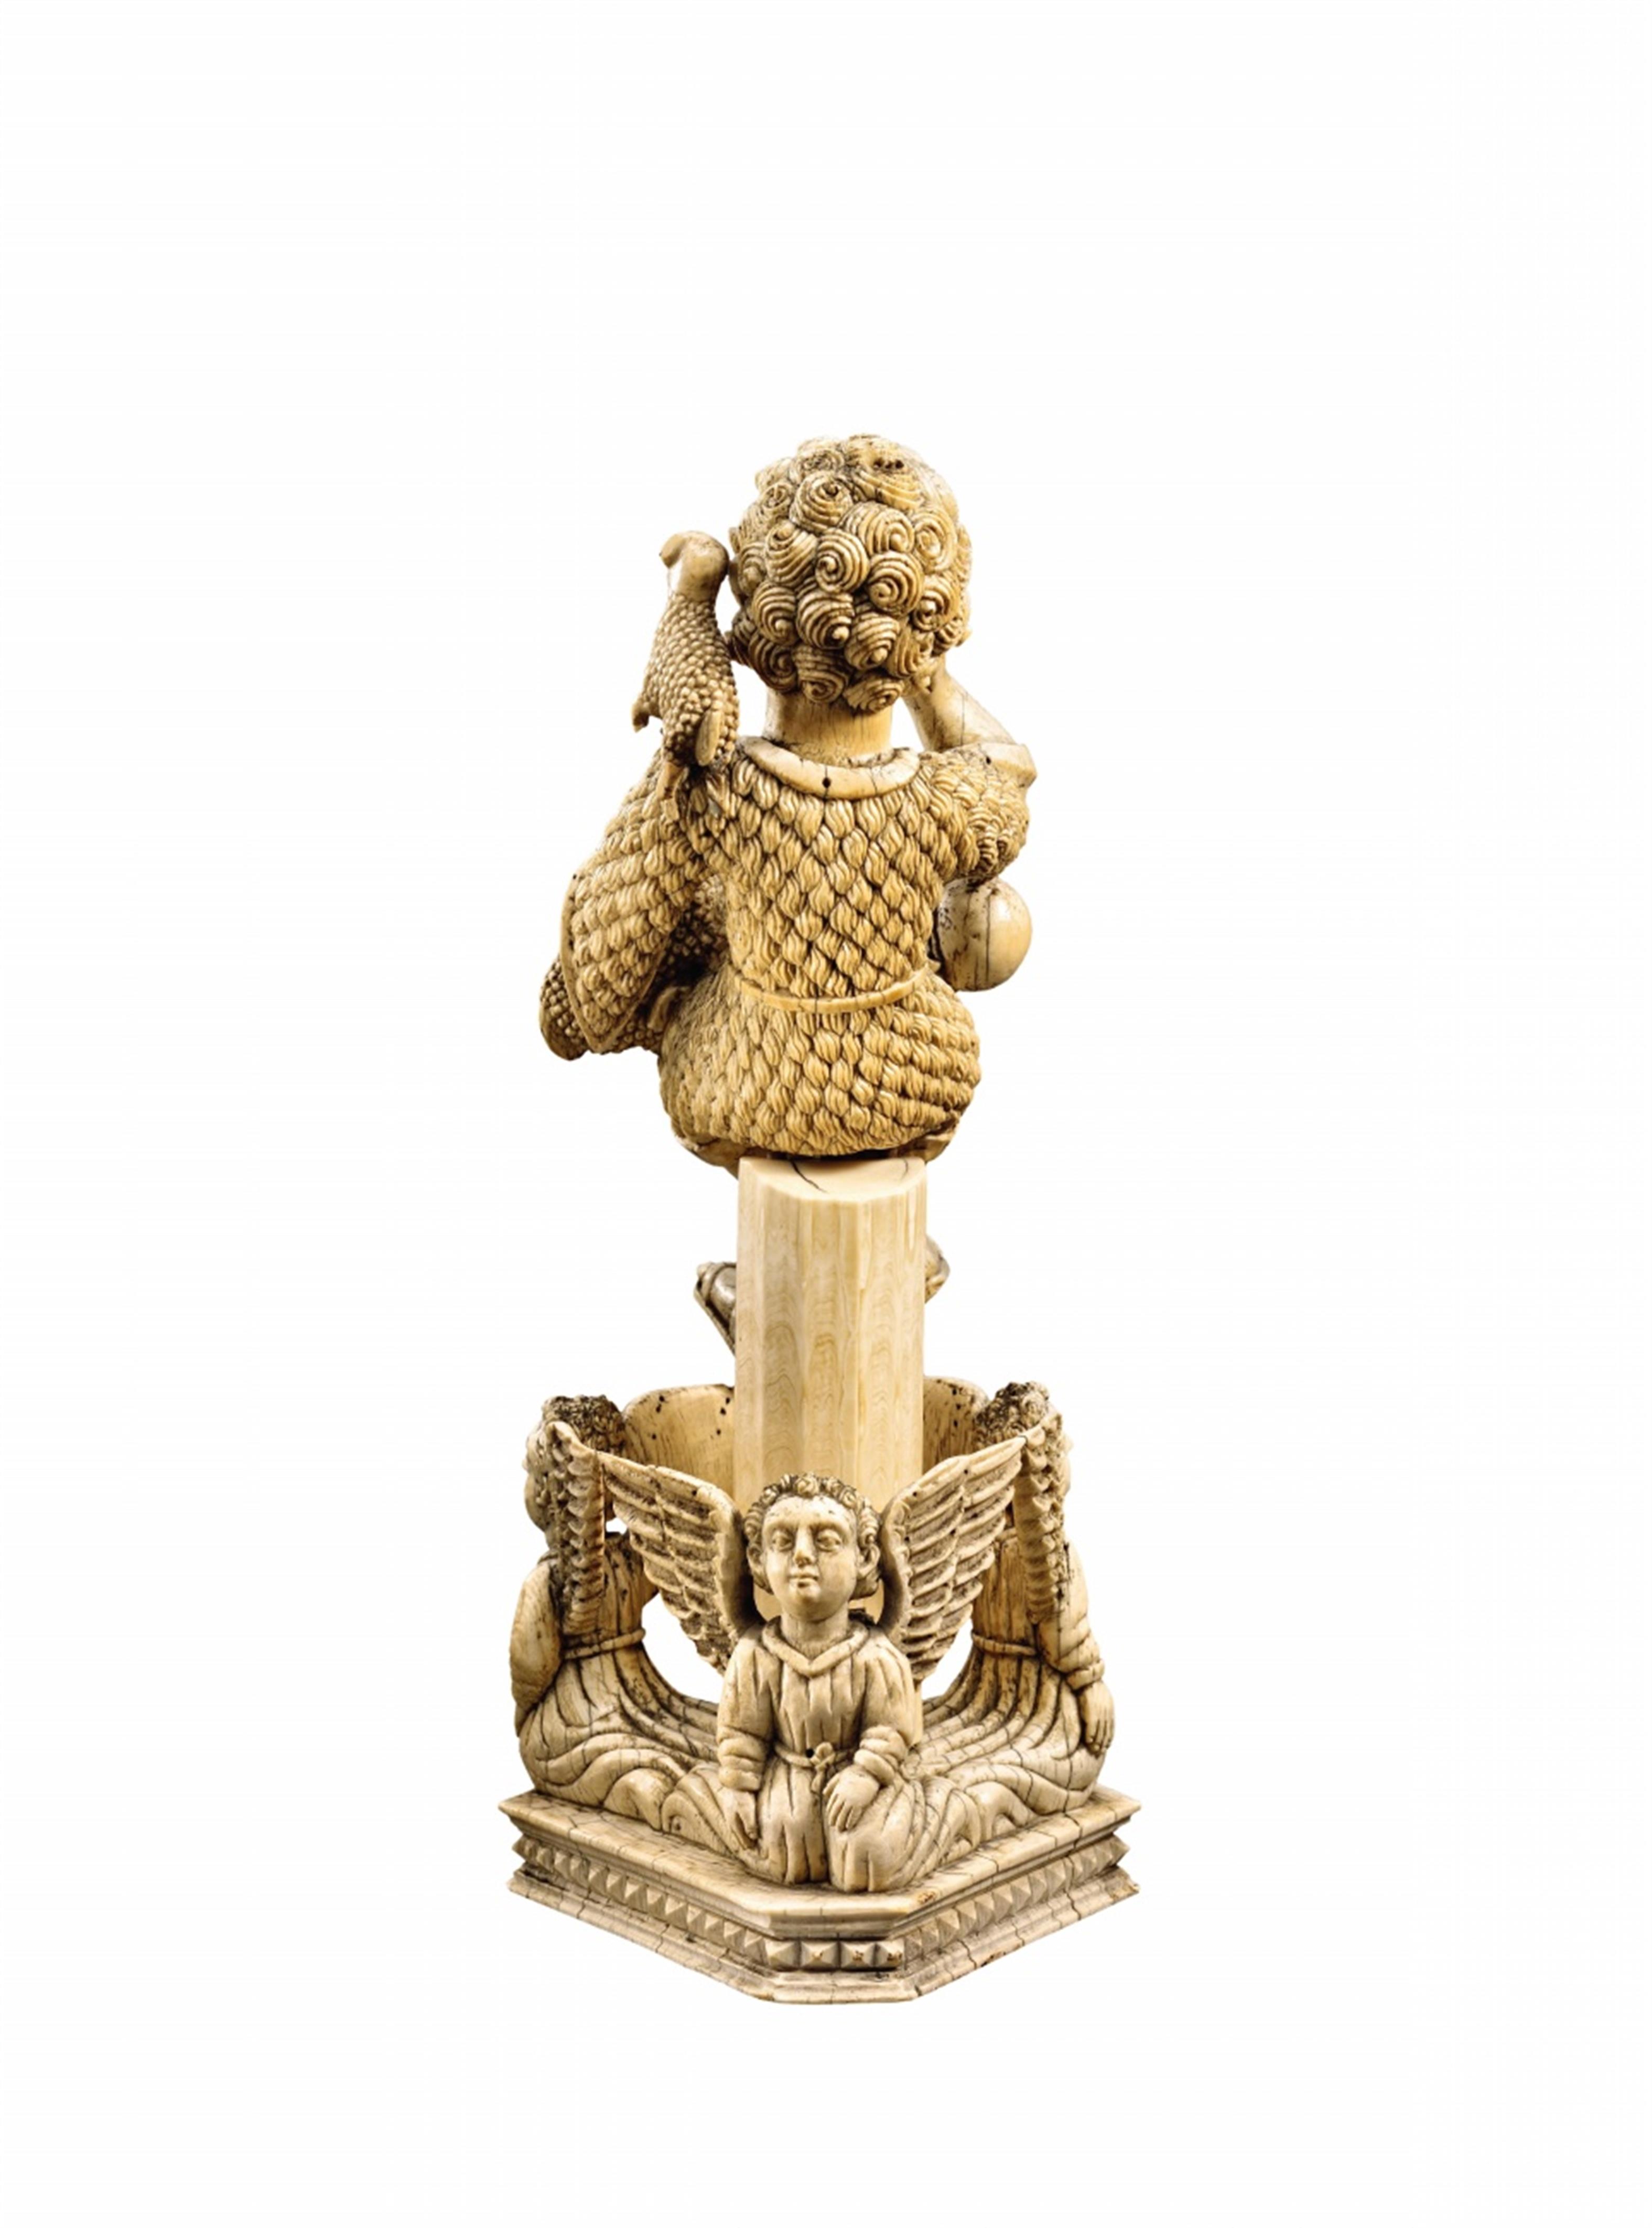 Goa 17th -18th century - A large 17th - 18th century Goan carved ivory depiction of Christ as the good shepherd. - image-2